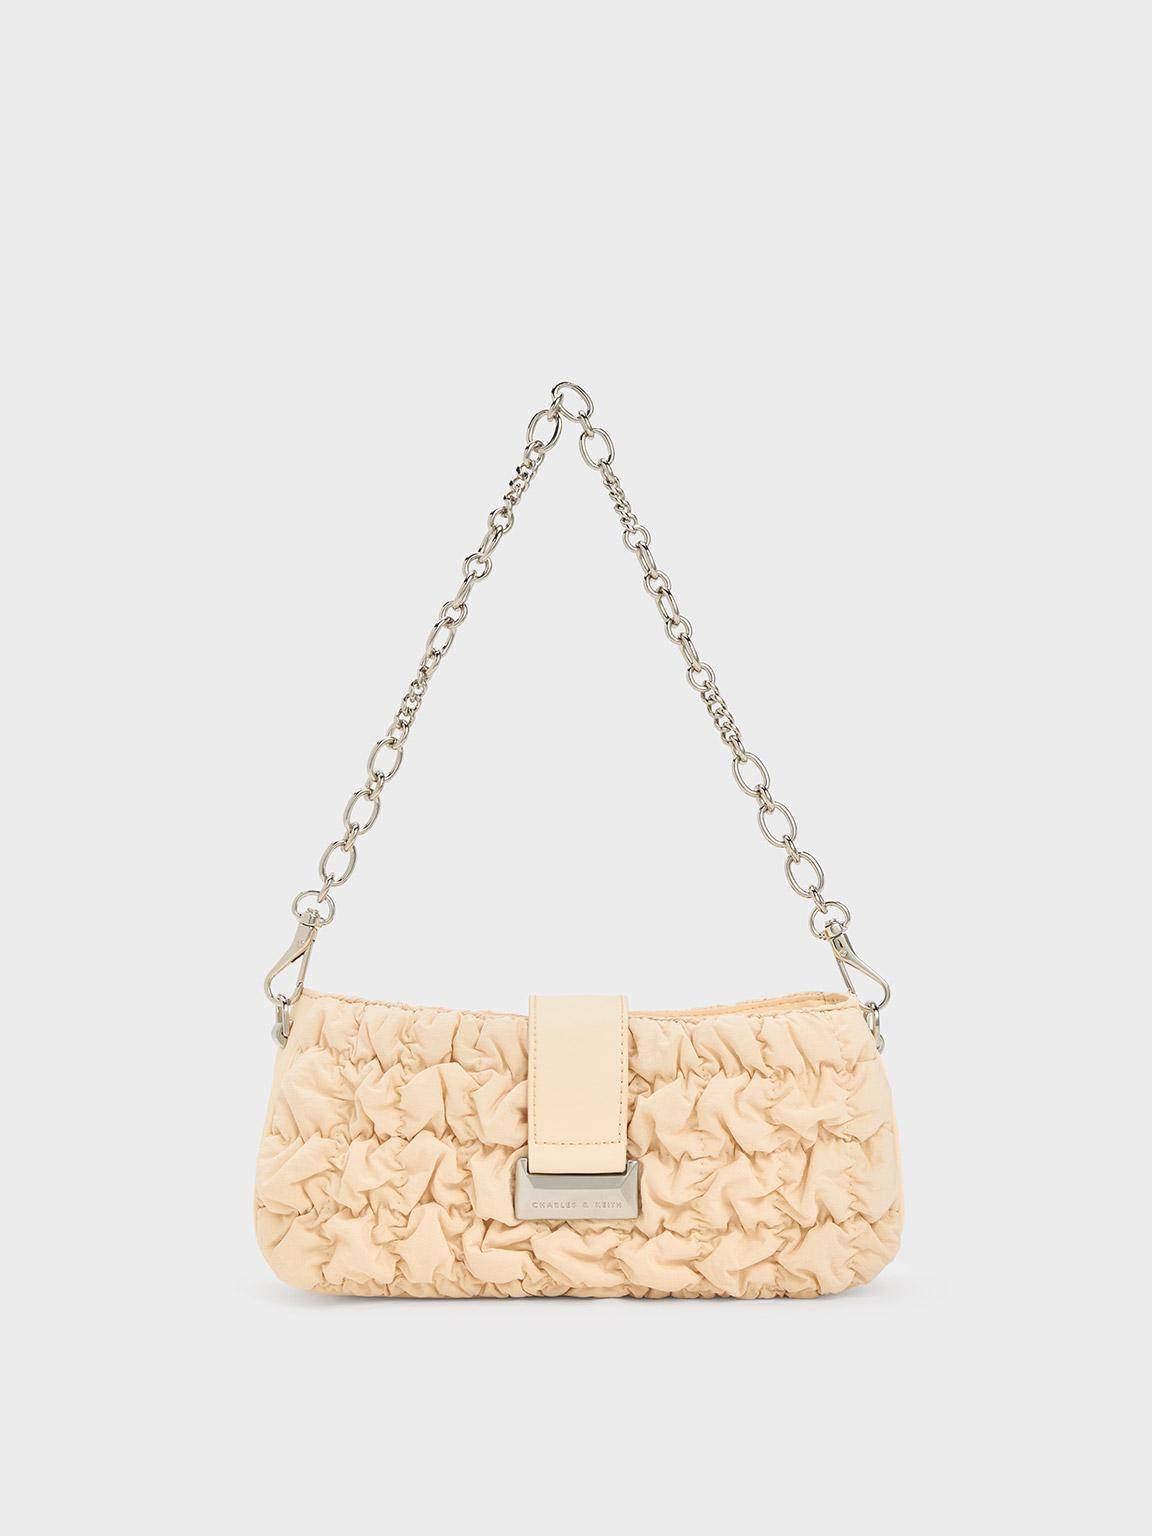 Charles & Keith Ruched Nylon Chain Handle Bag in Natural